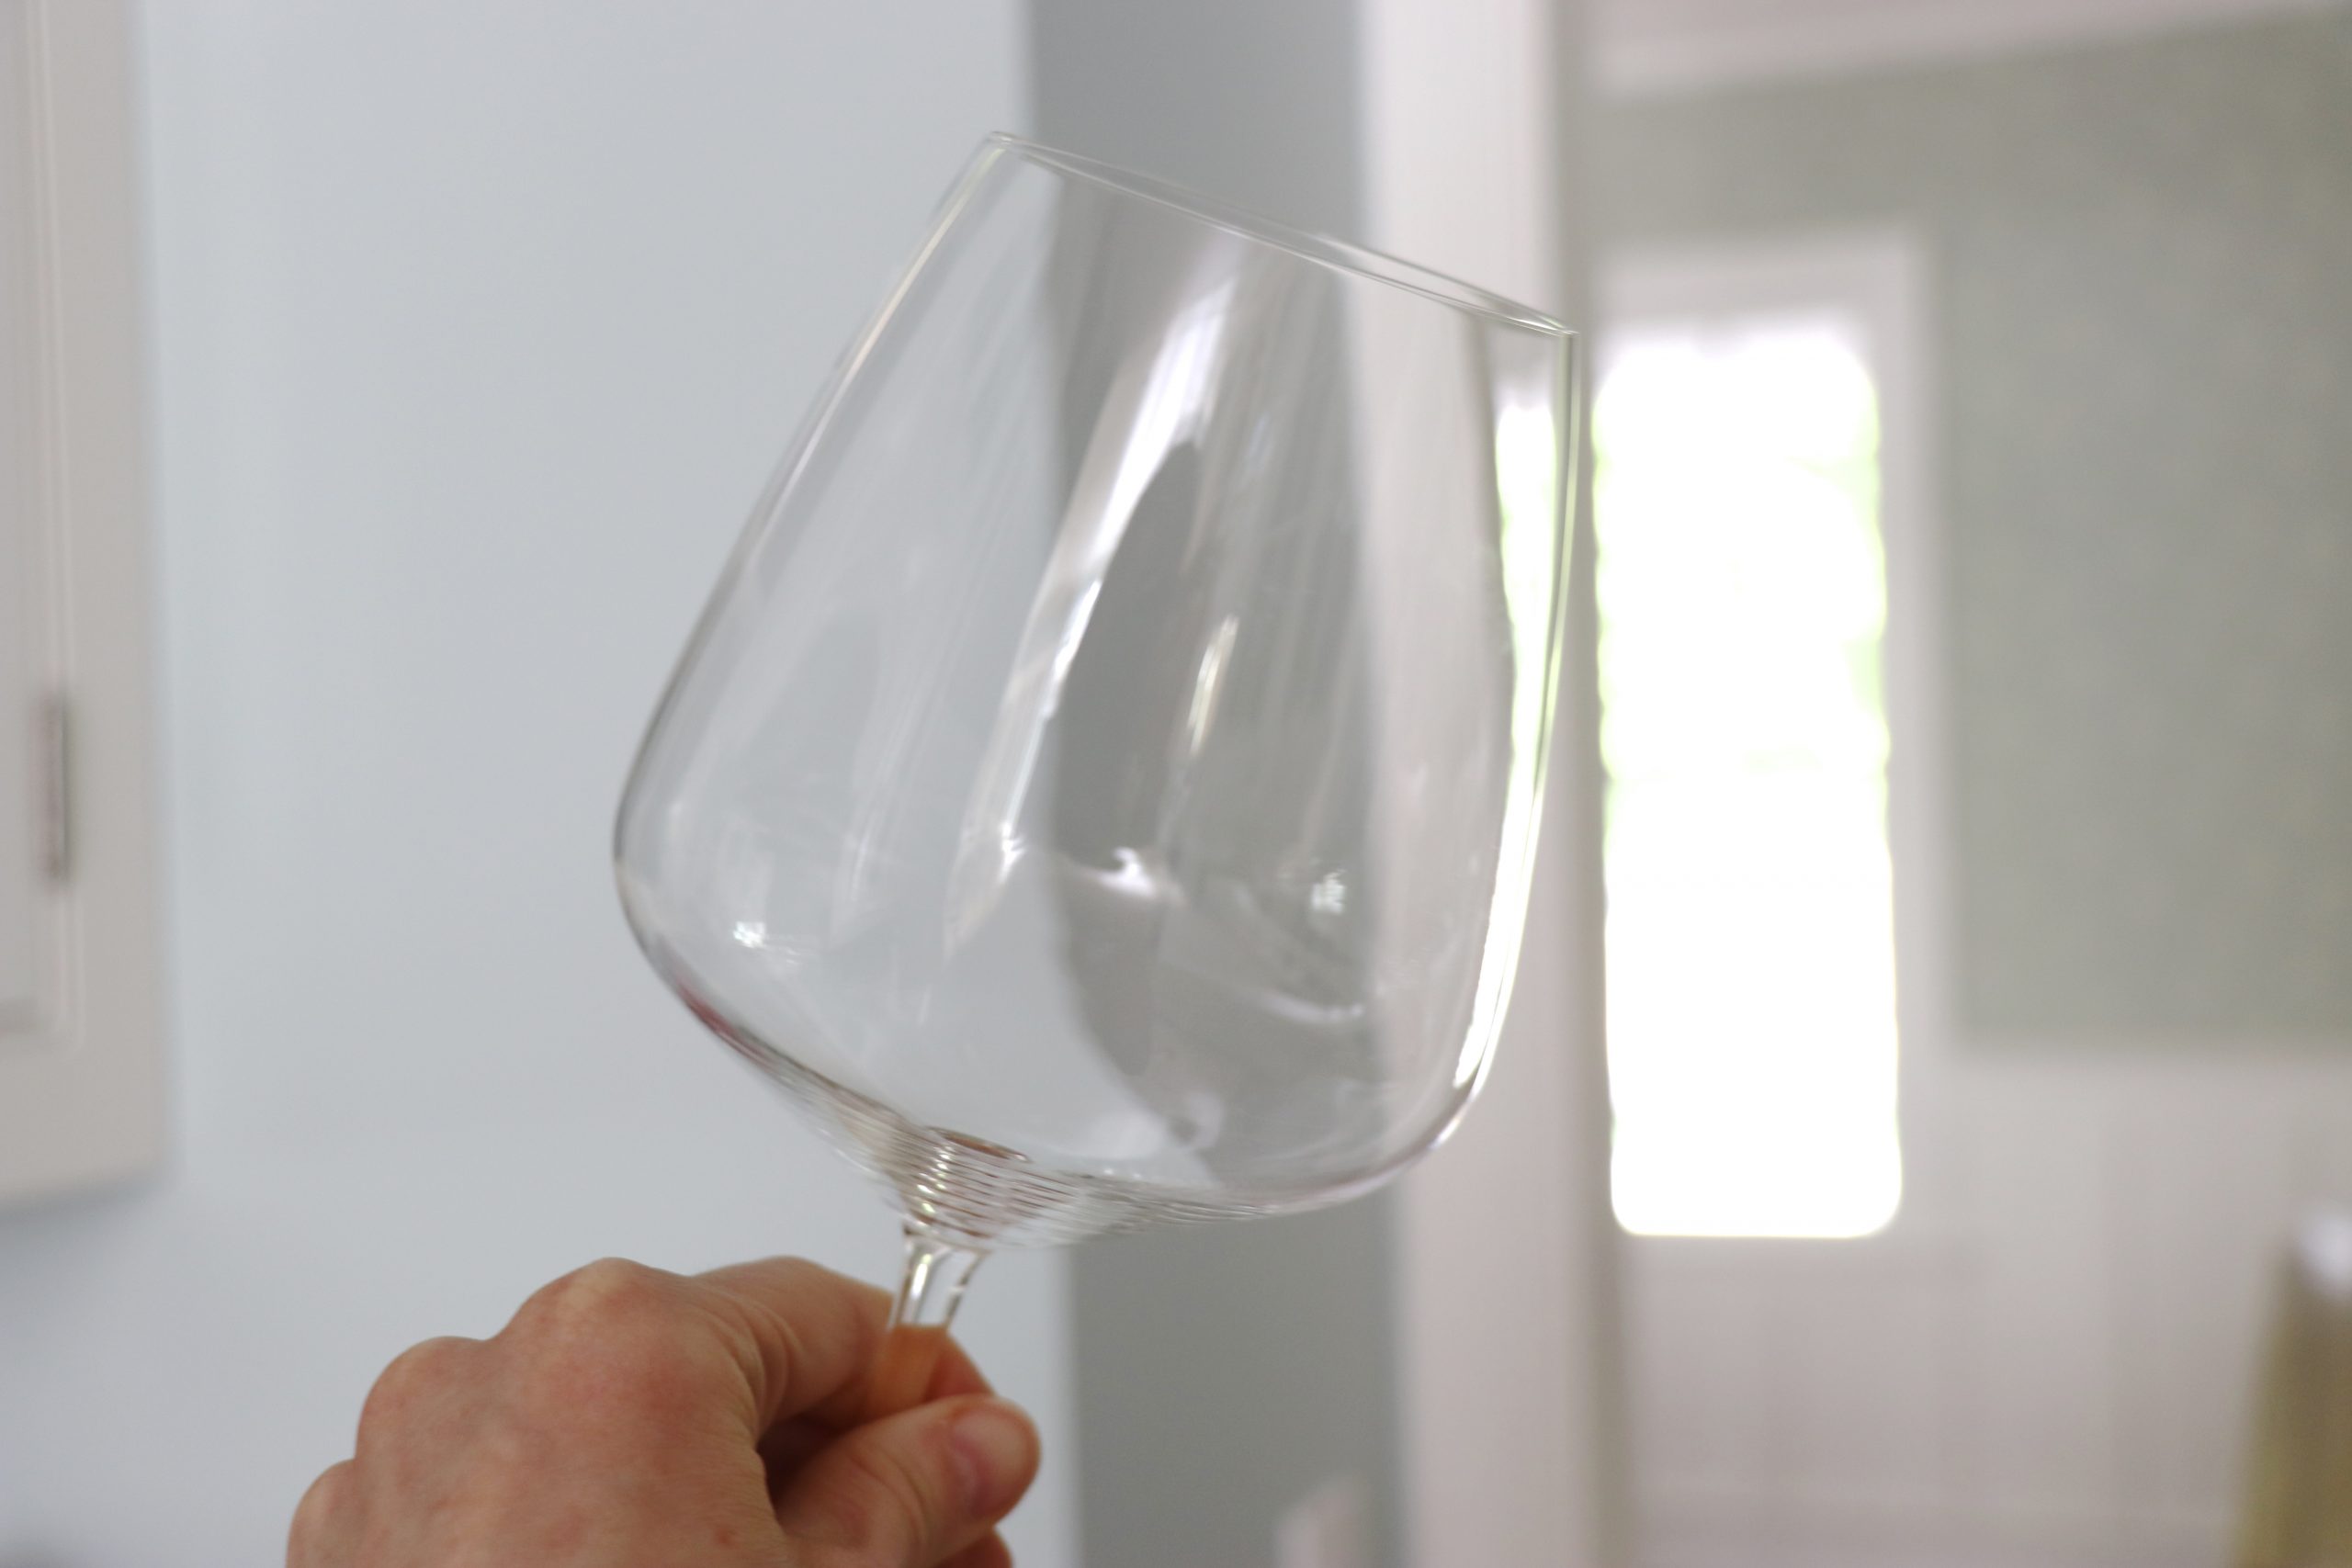 https://simplyorganized.me/wp-content/uploads/2020/05/clean-wine-glass-scaled.jpg